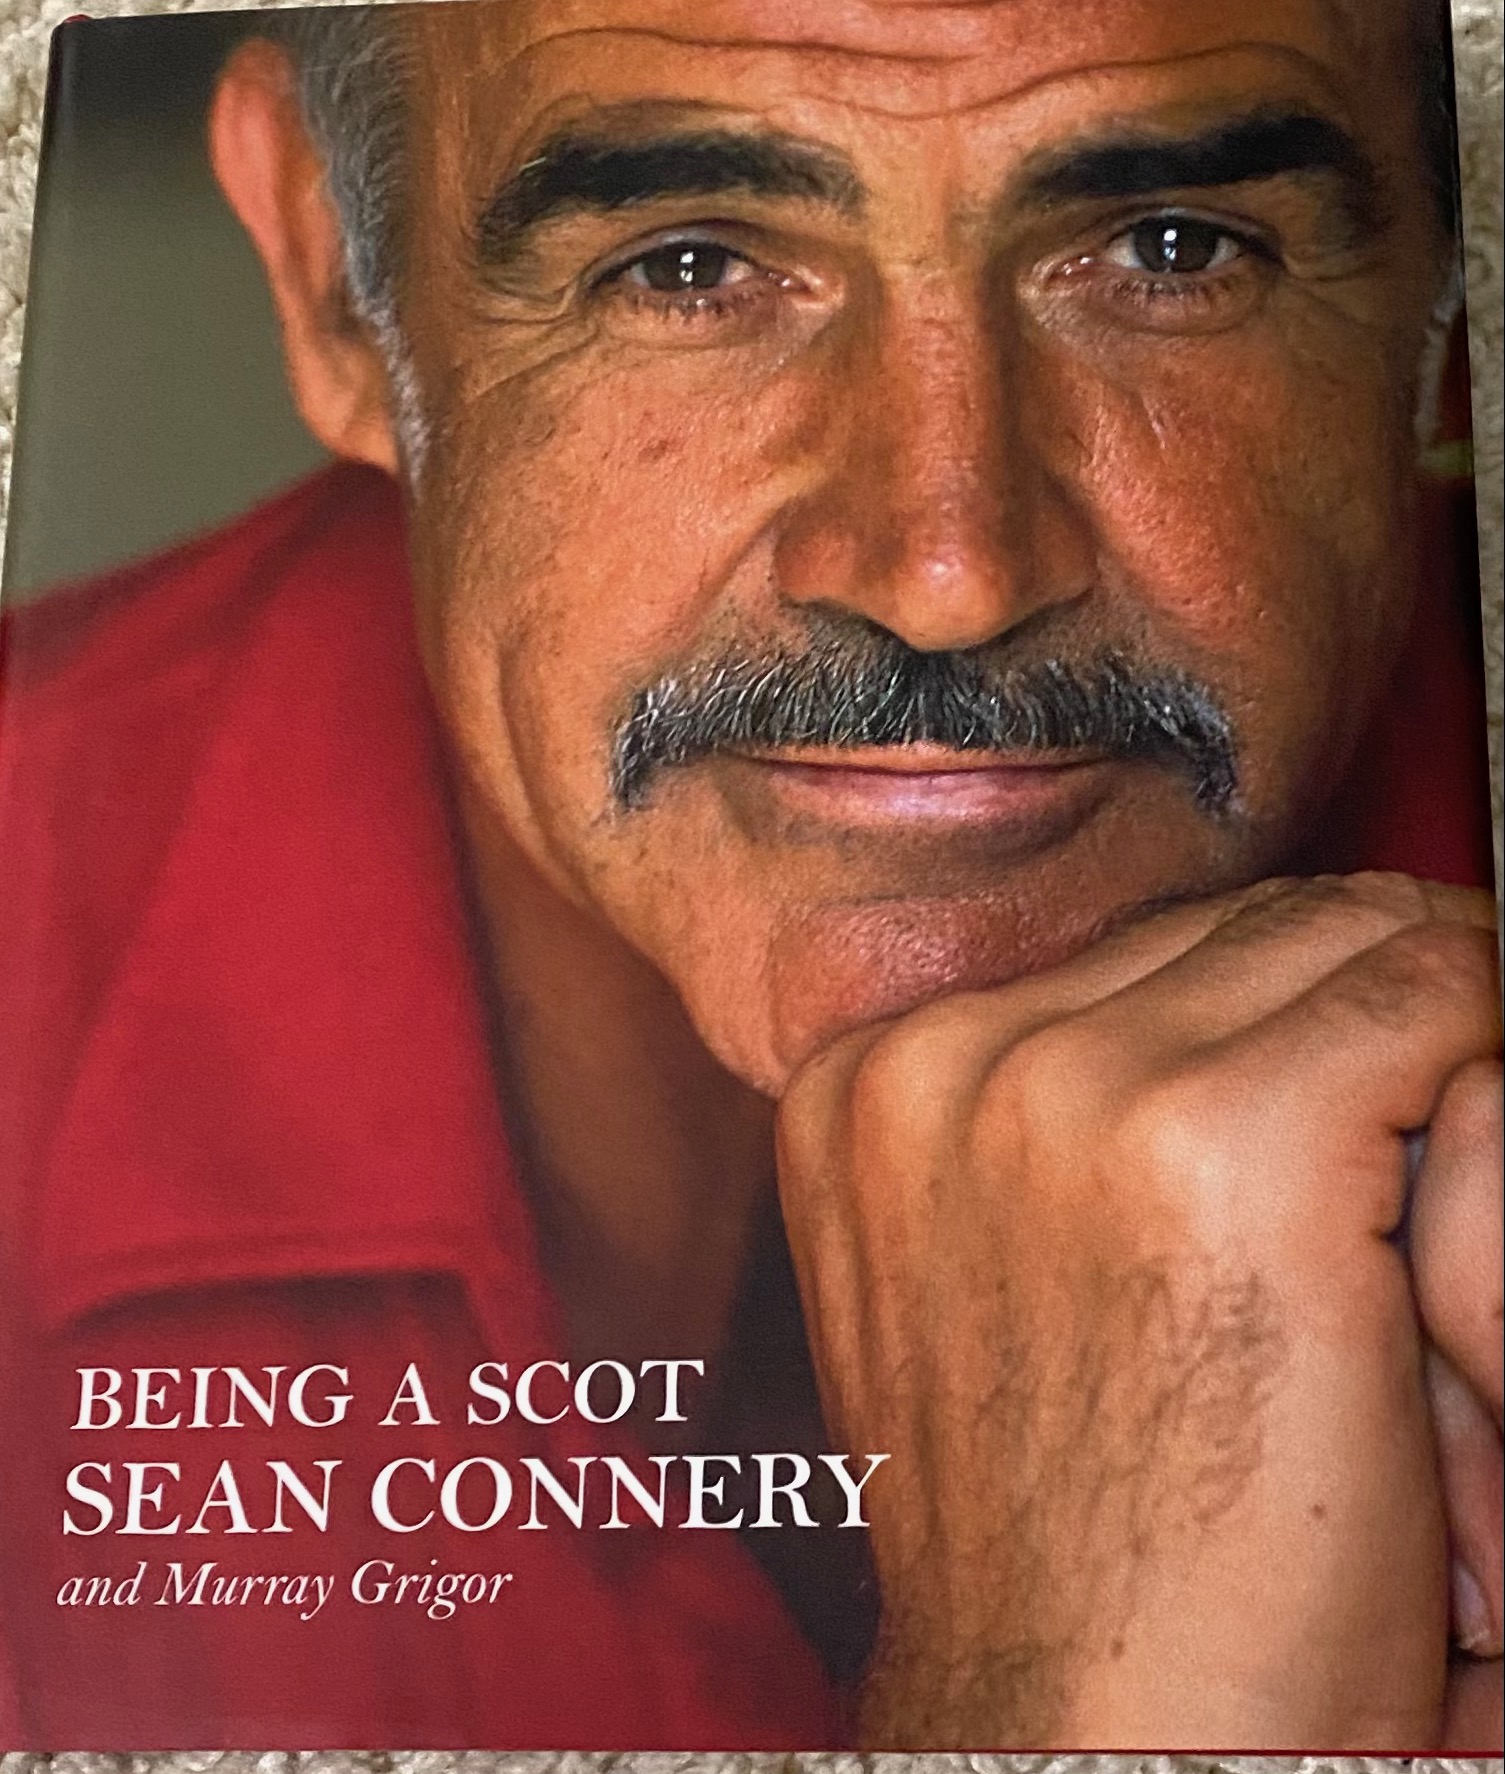 Sean Connery signed autobiography  ‘Being a Scot’